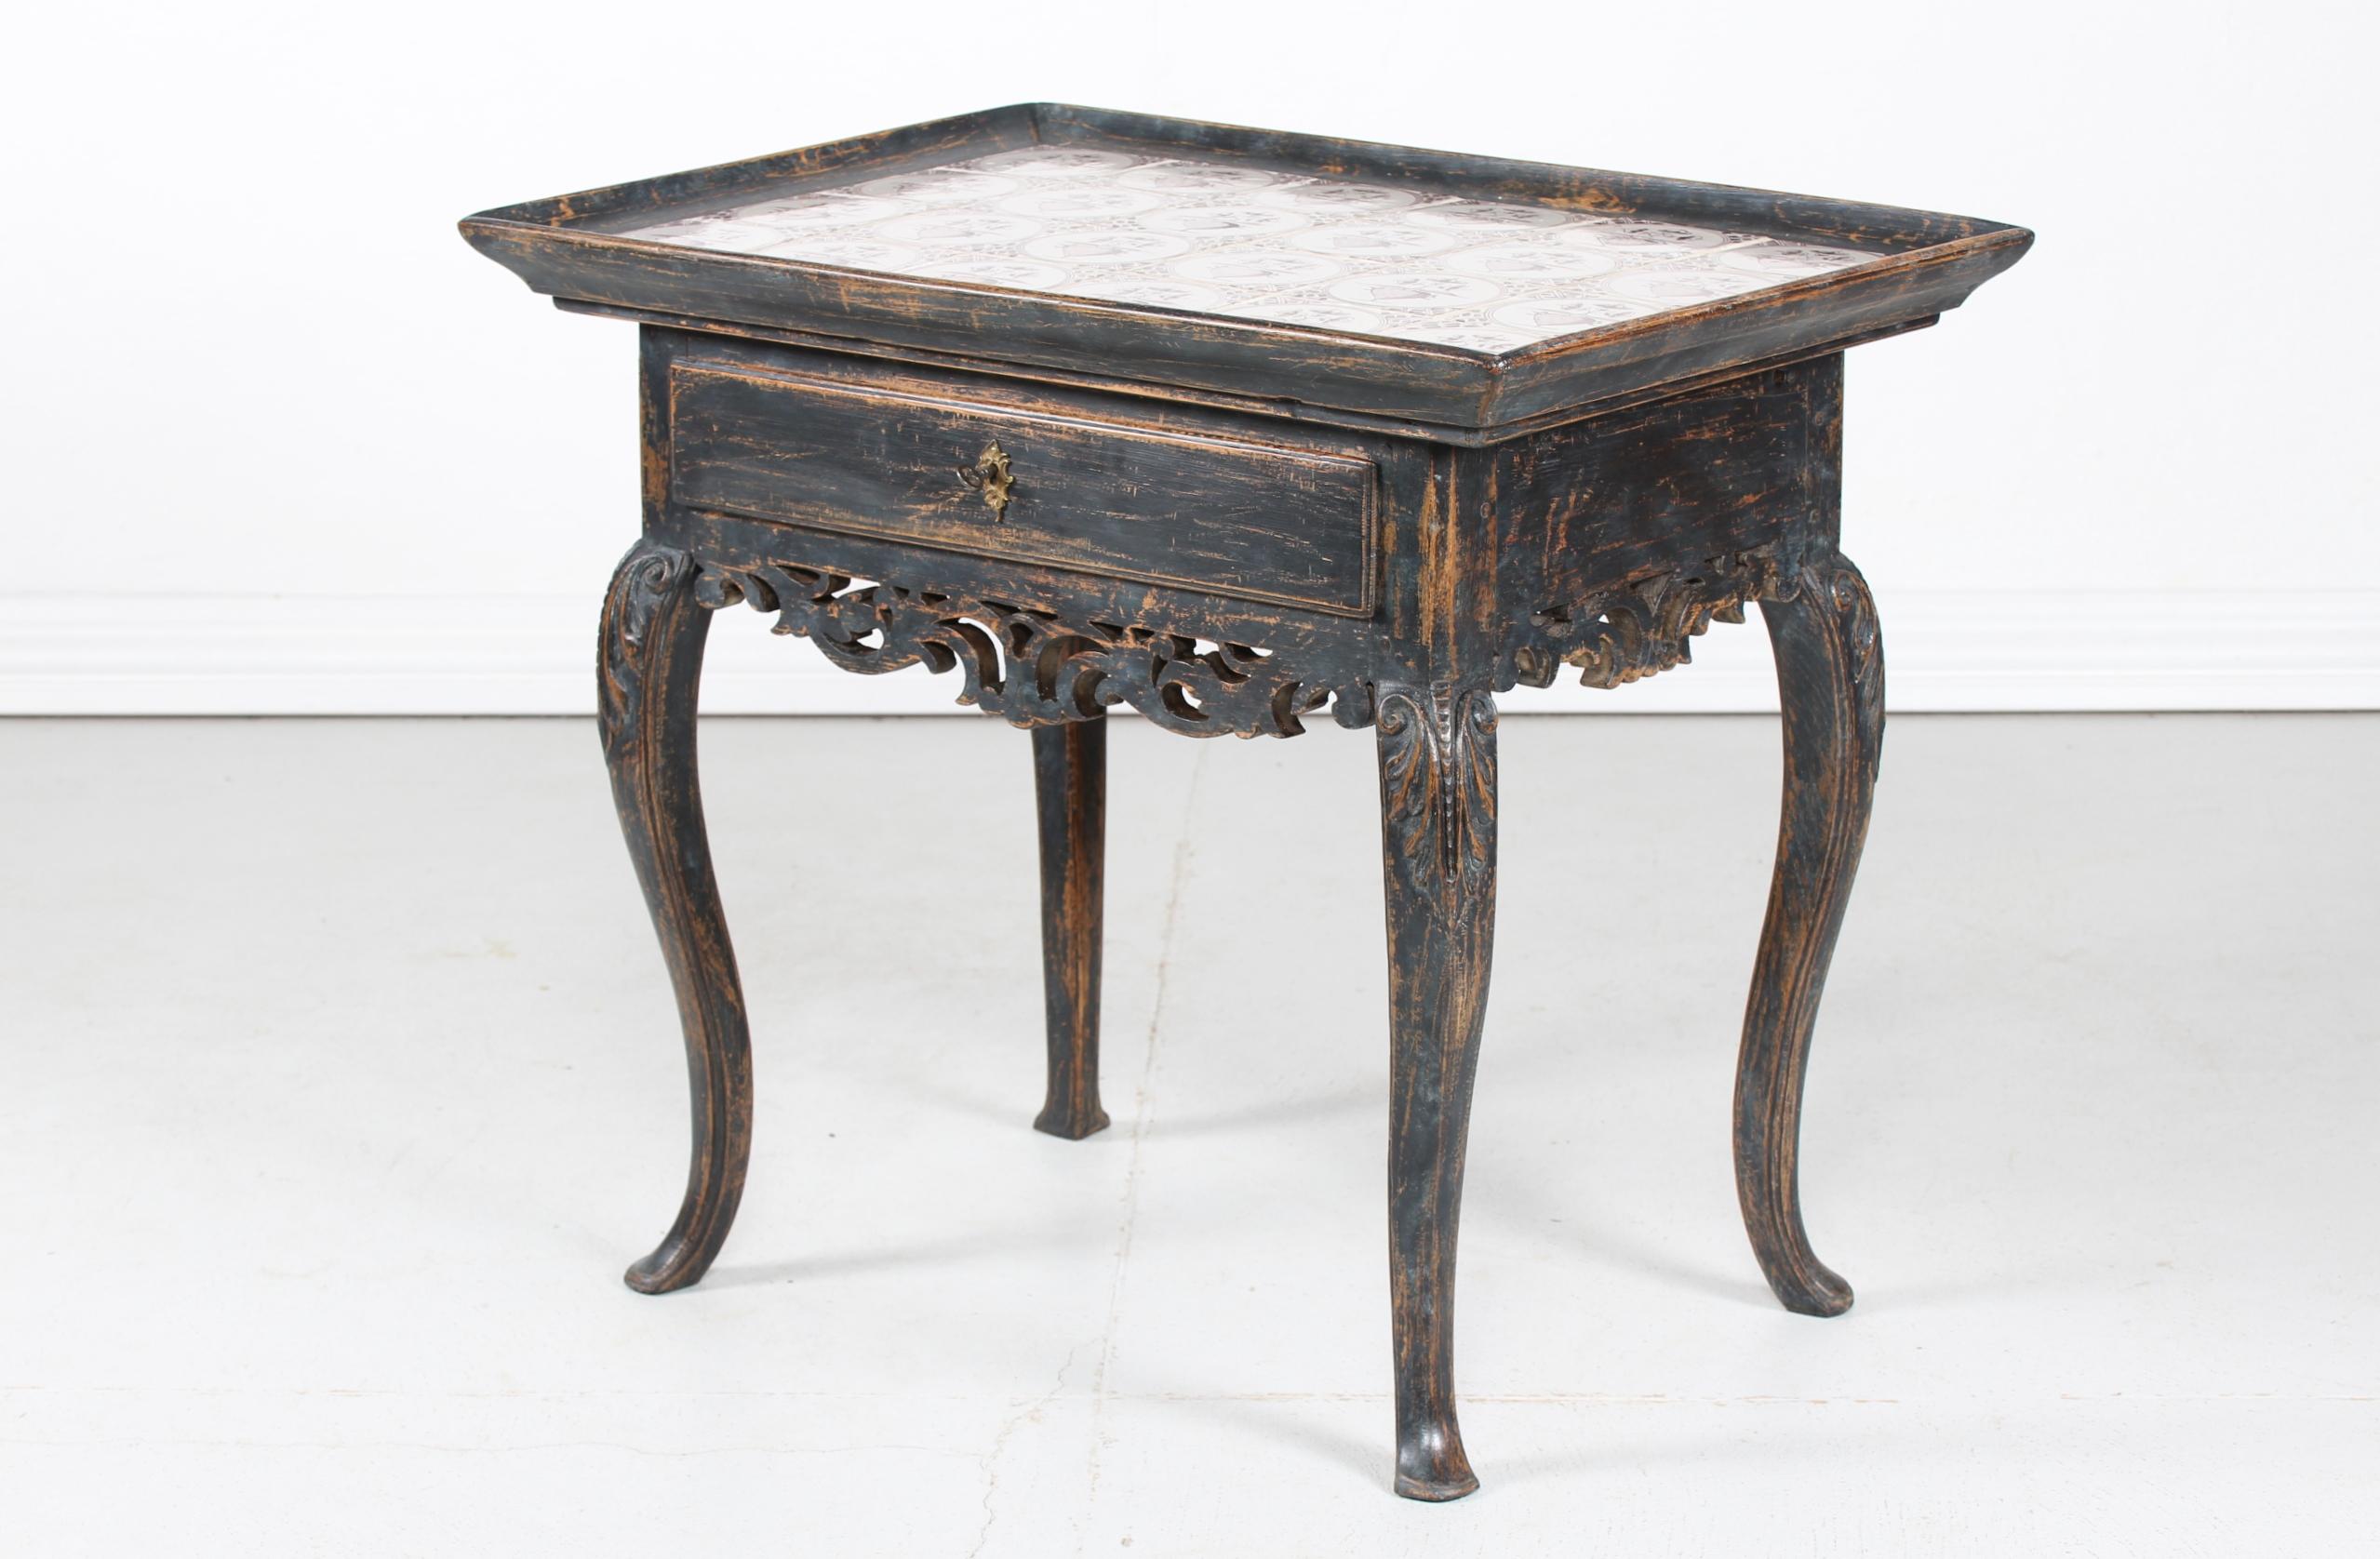 Carved Scandinavian Rococo Table from the 19th Century with Dutch Handpainted Tiles